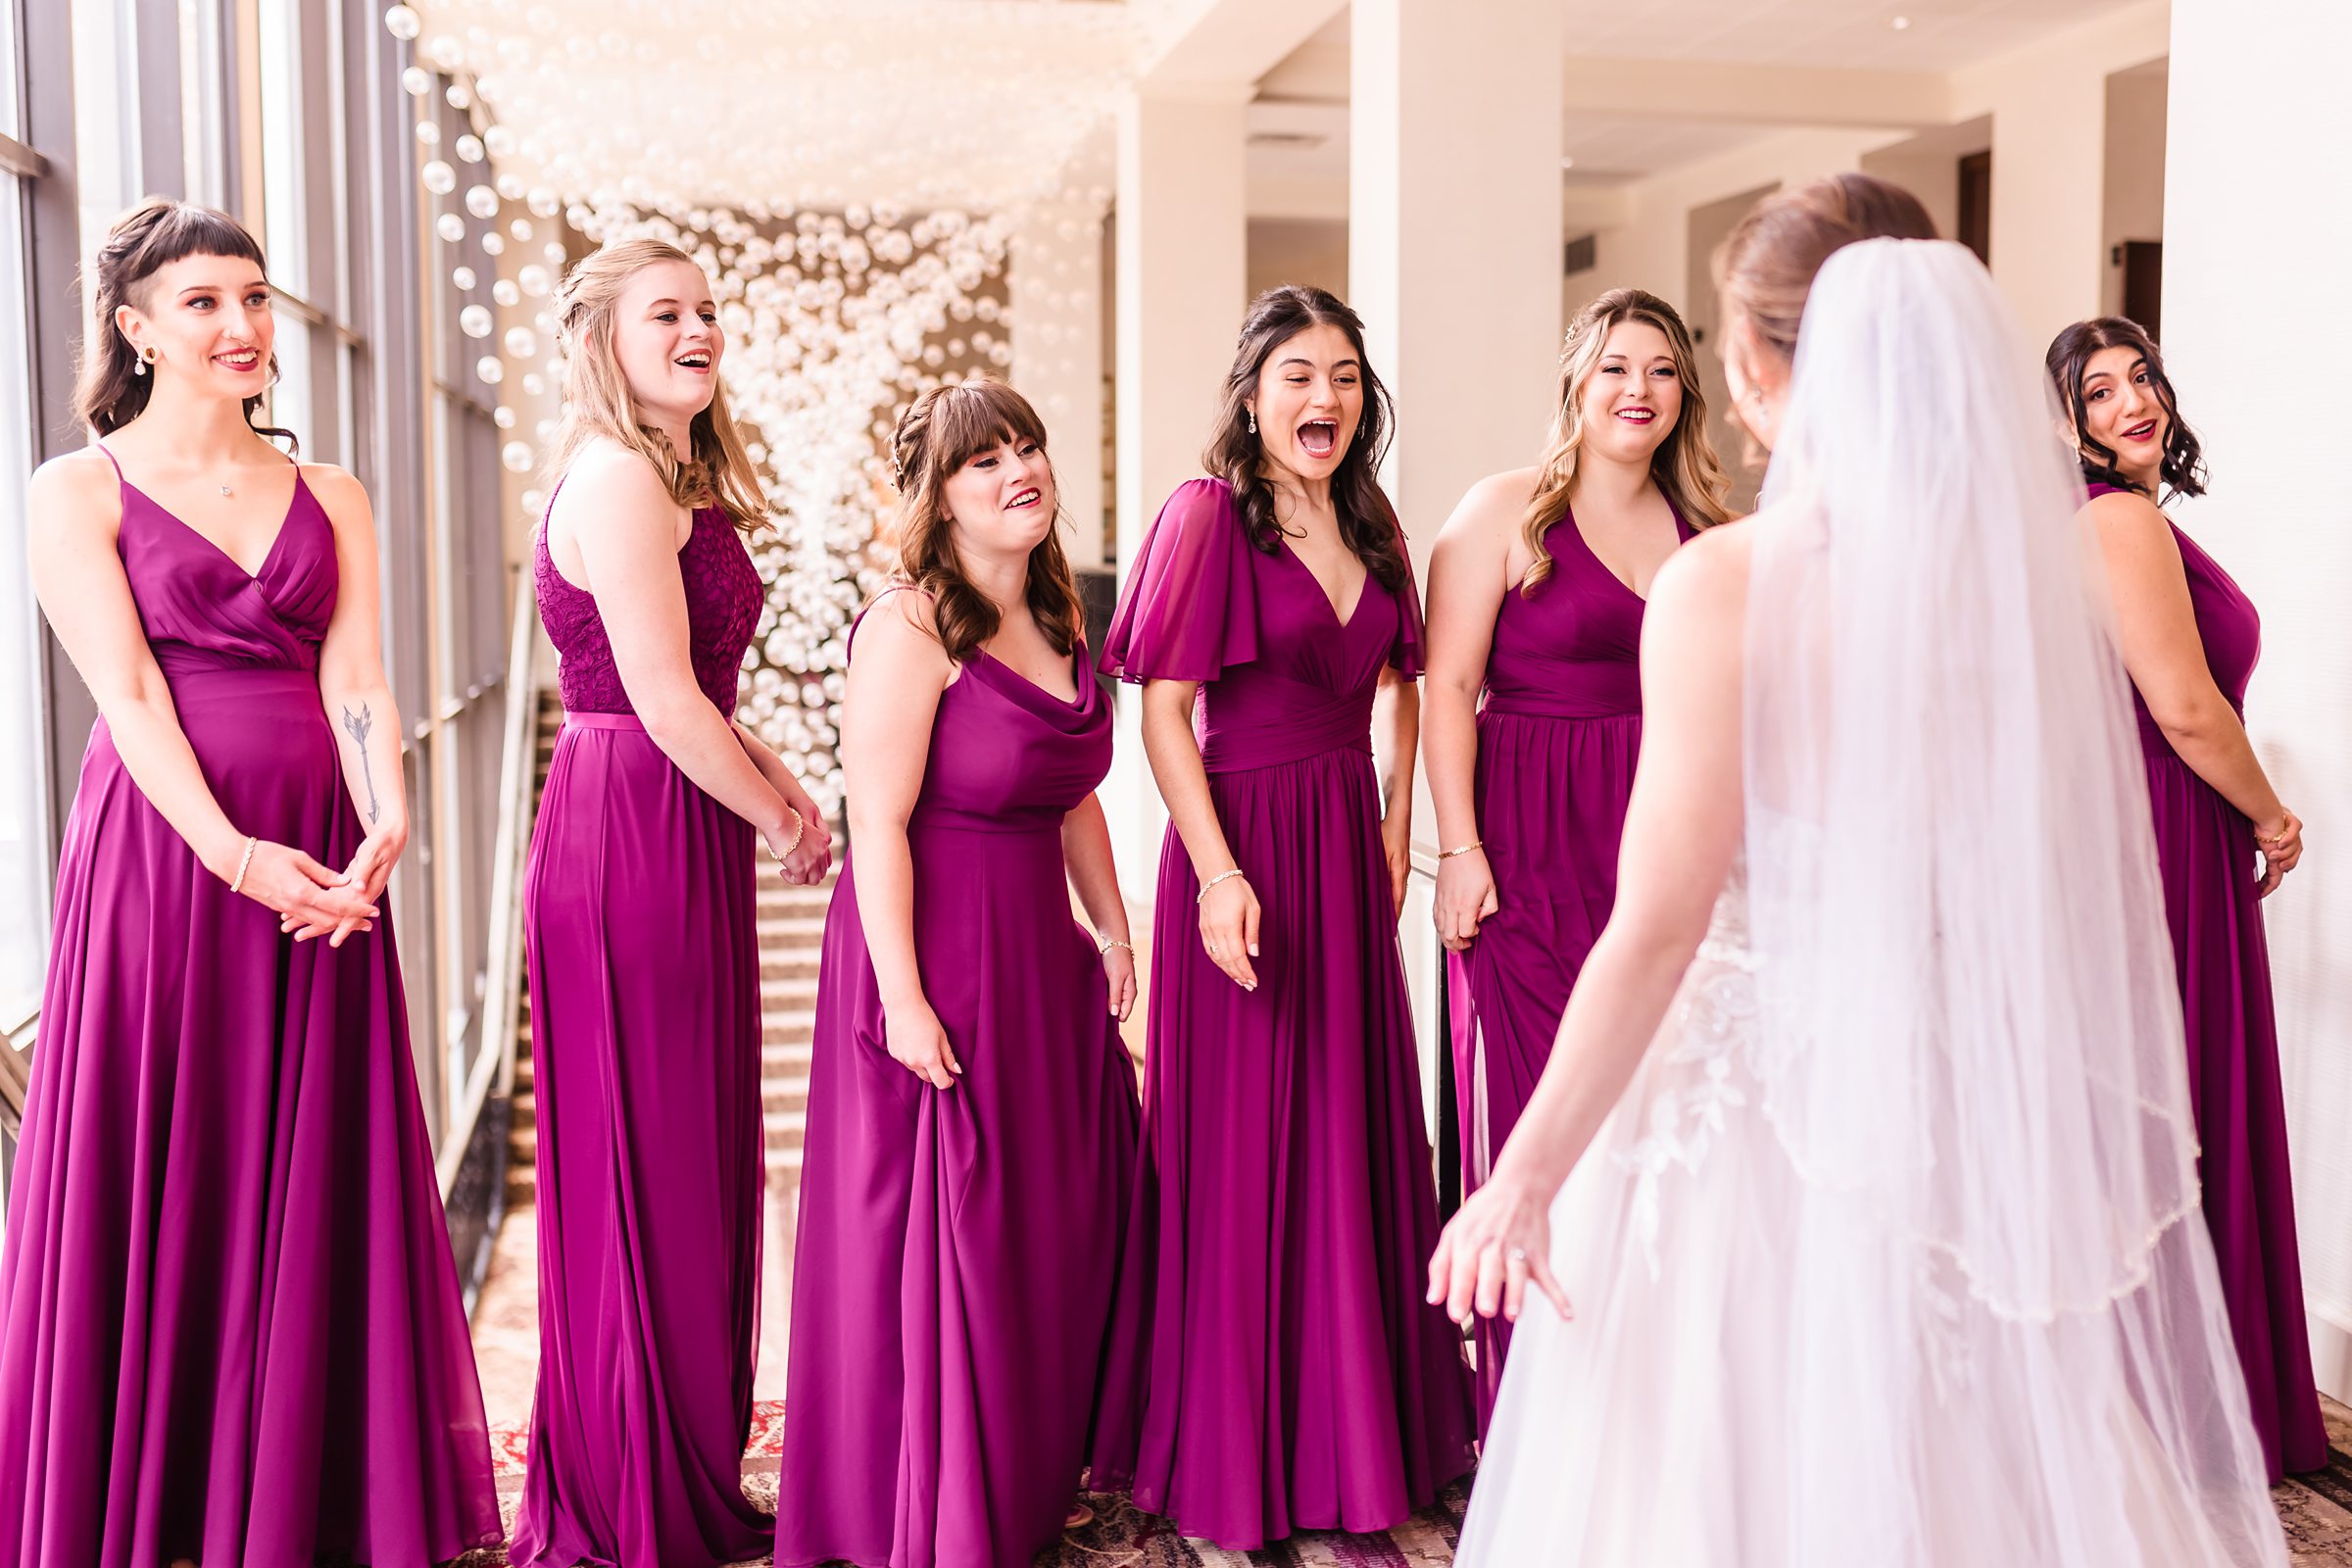 Bridesmaids see the bride before the wedding at the Hotel Pere Marquette in Peoria, Illinois.